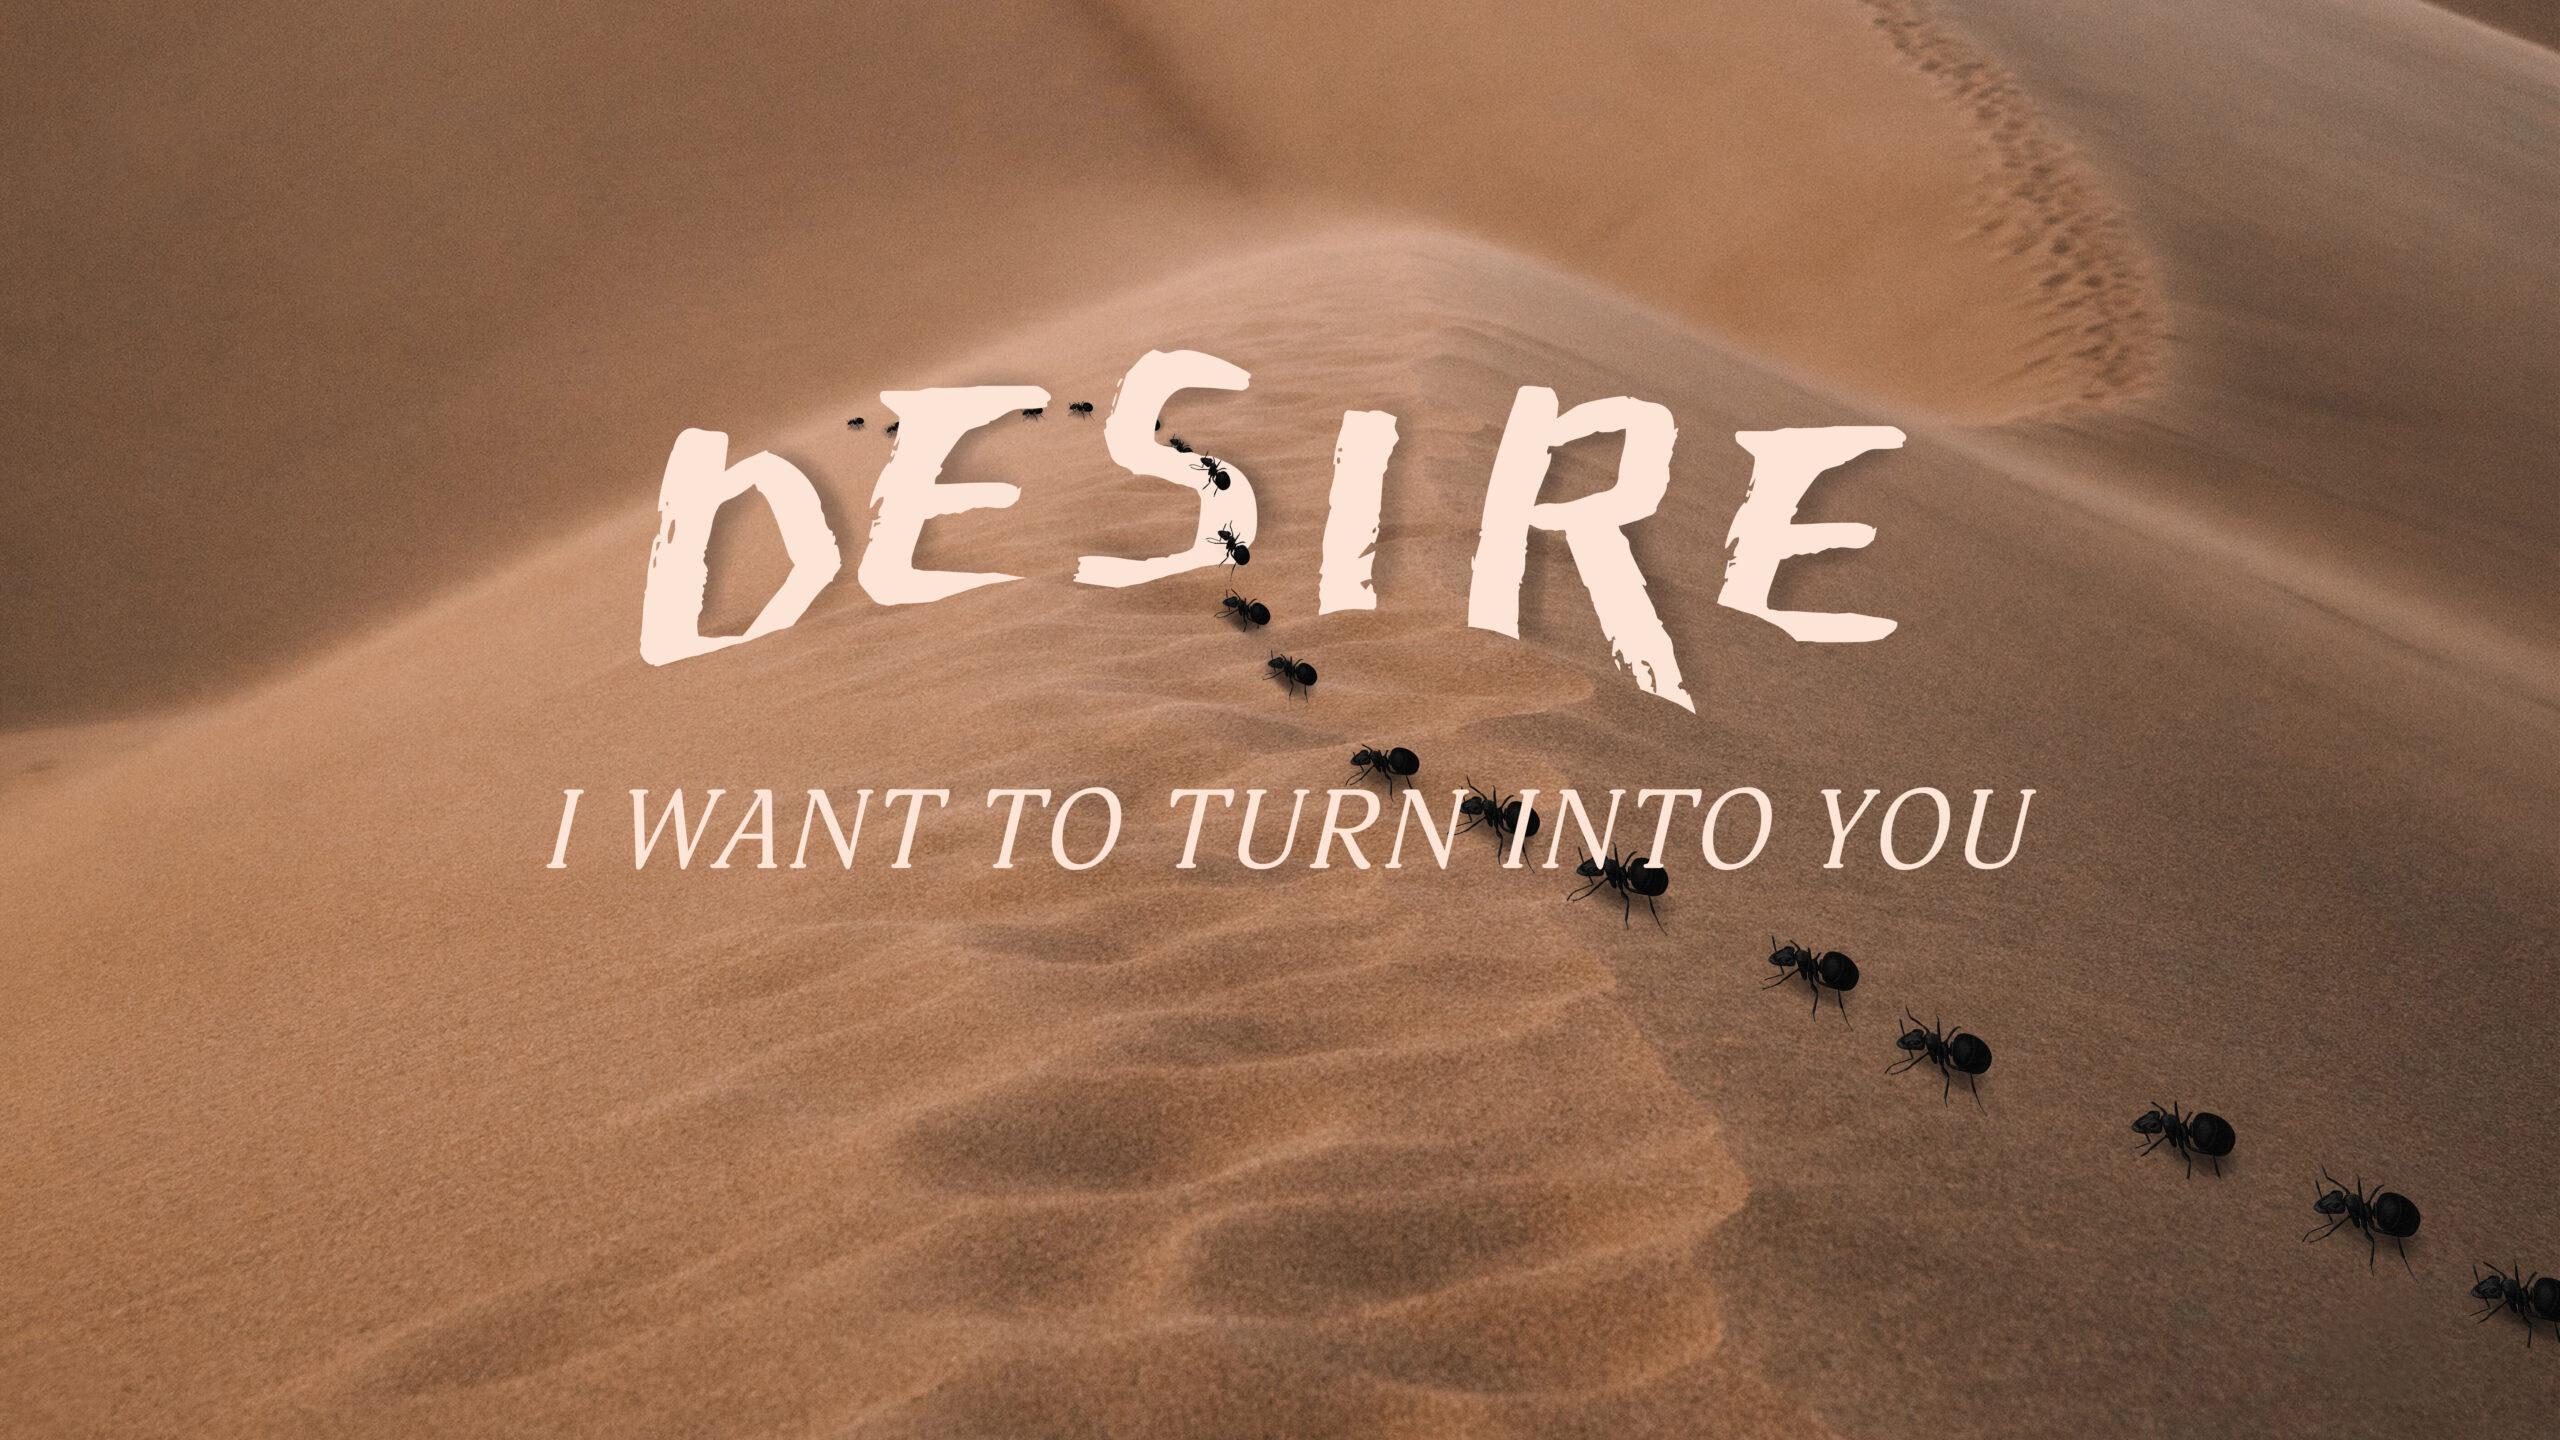 Ants crawl over a sand dune in a line. Text reads "Desire, I want to turn into you."